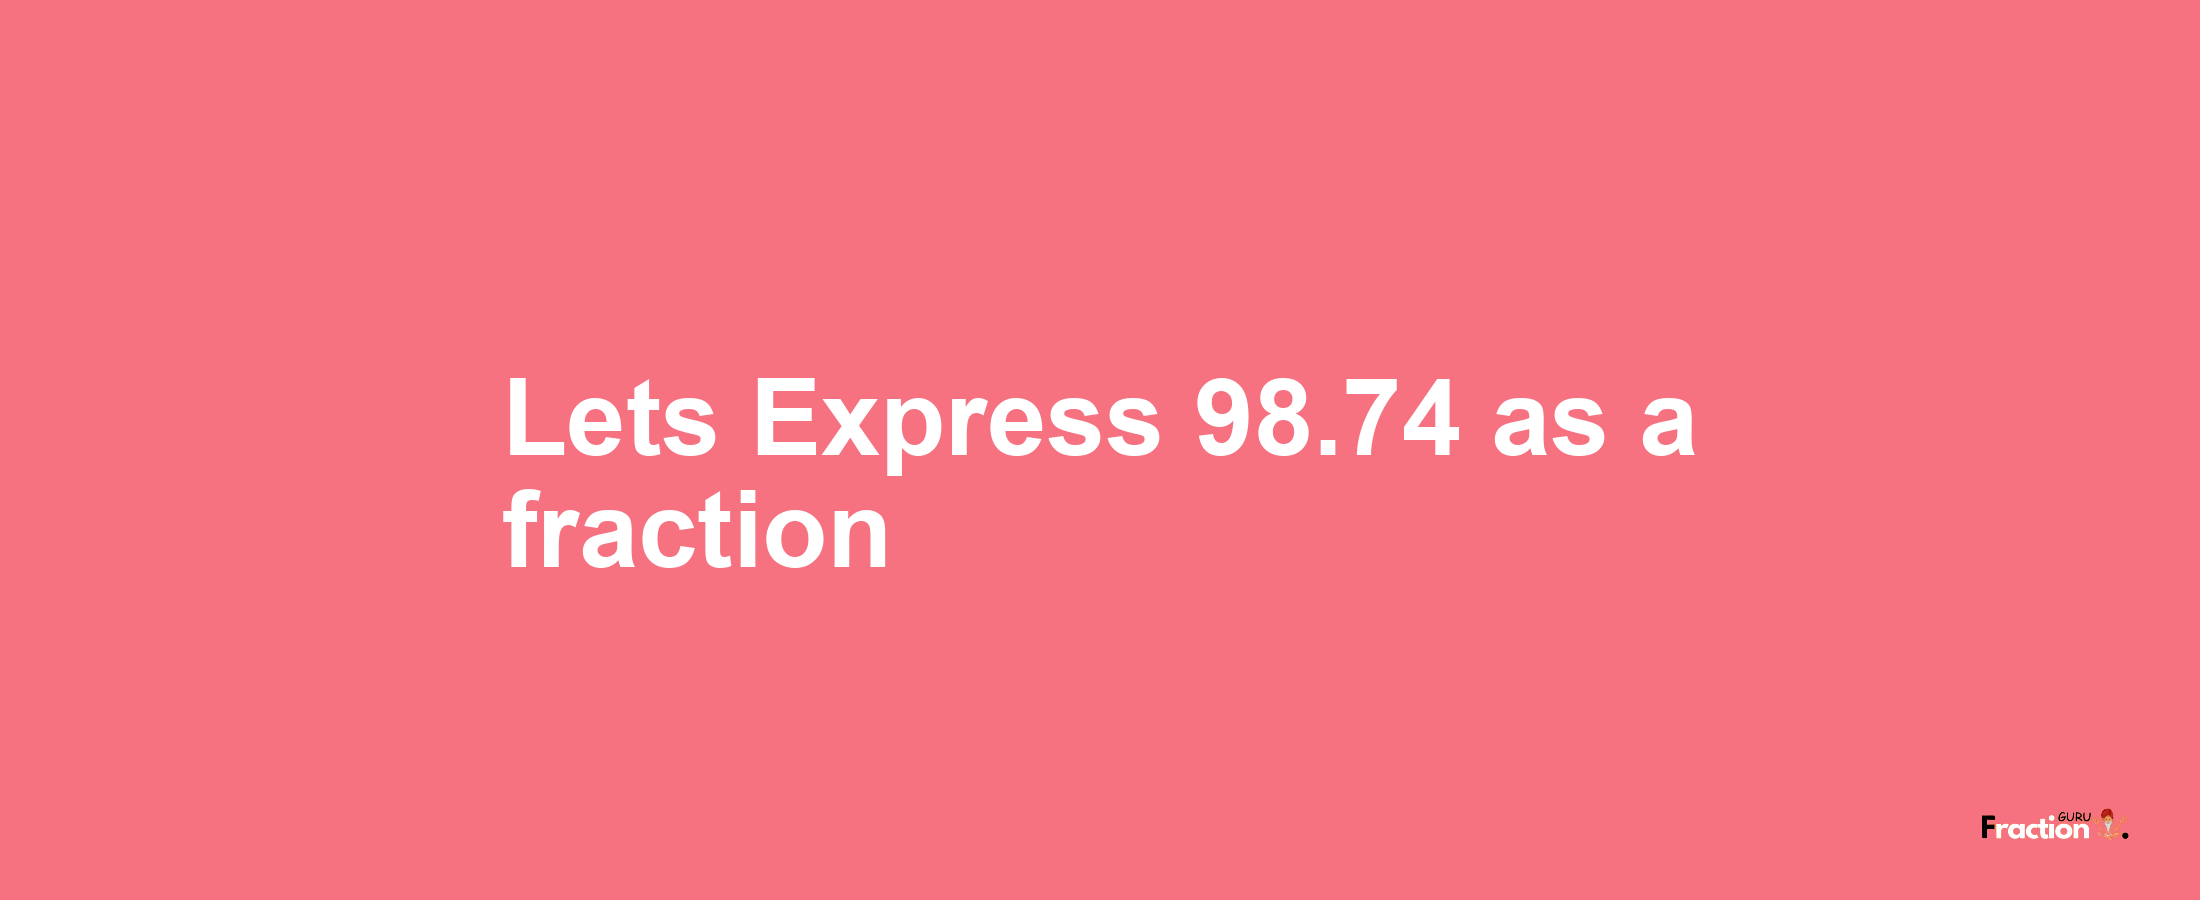 Lets Express 98.74 as afraction